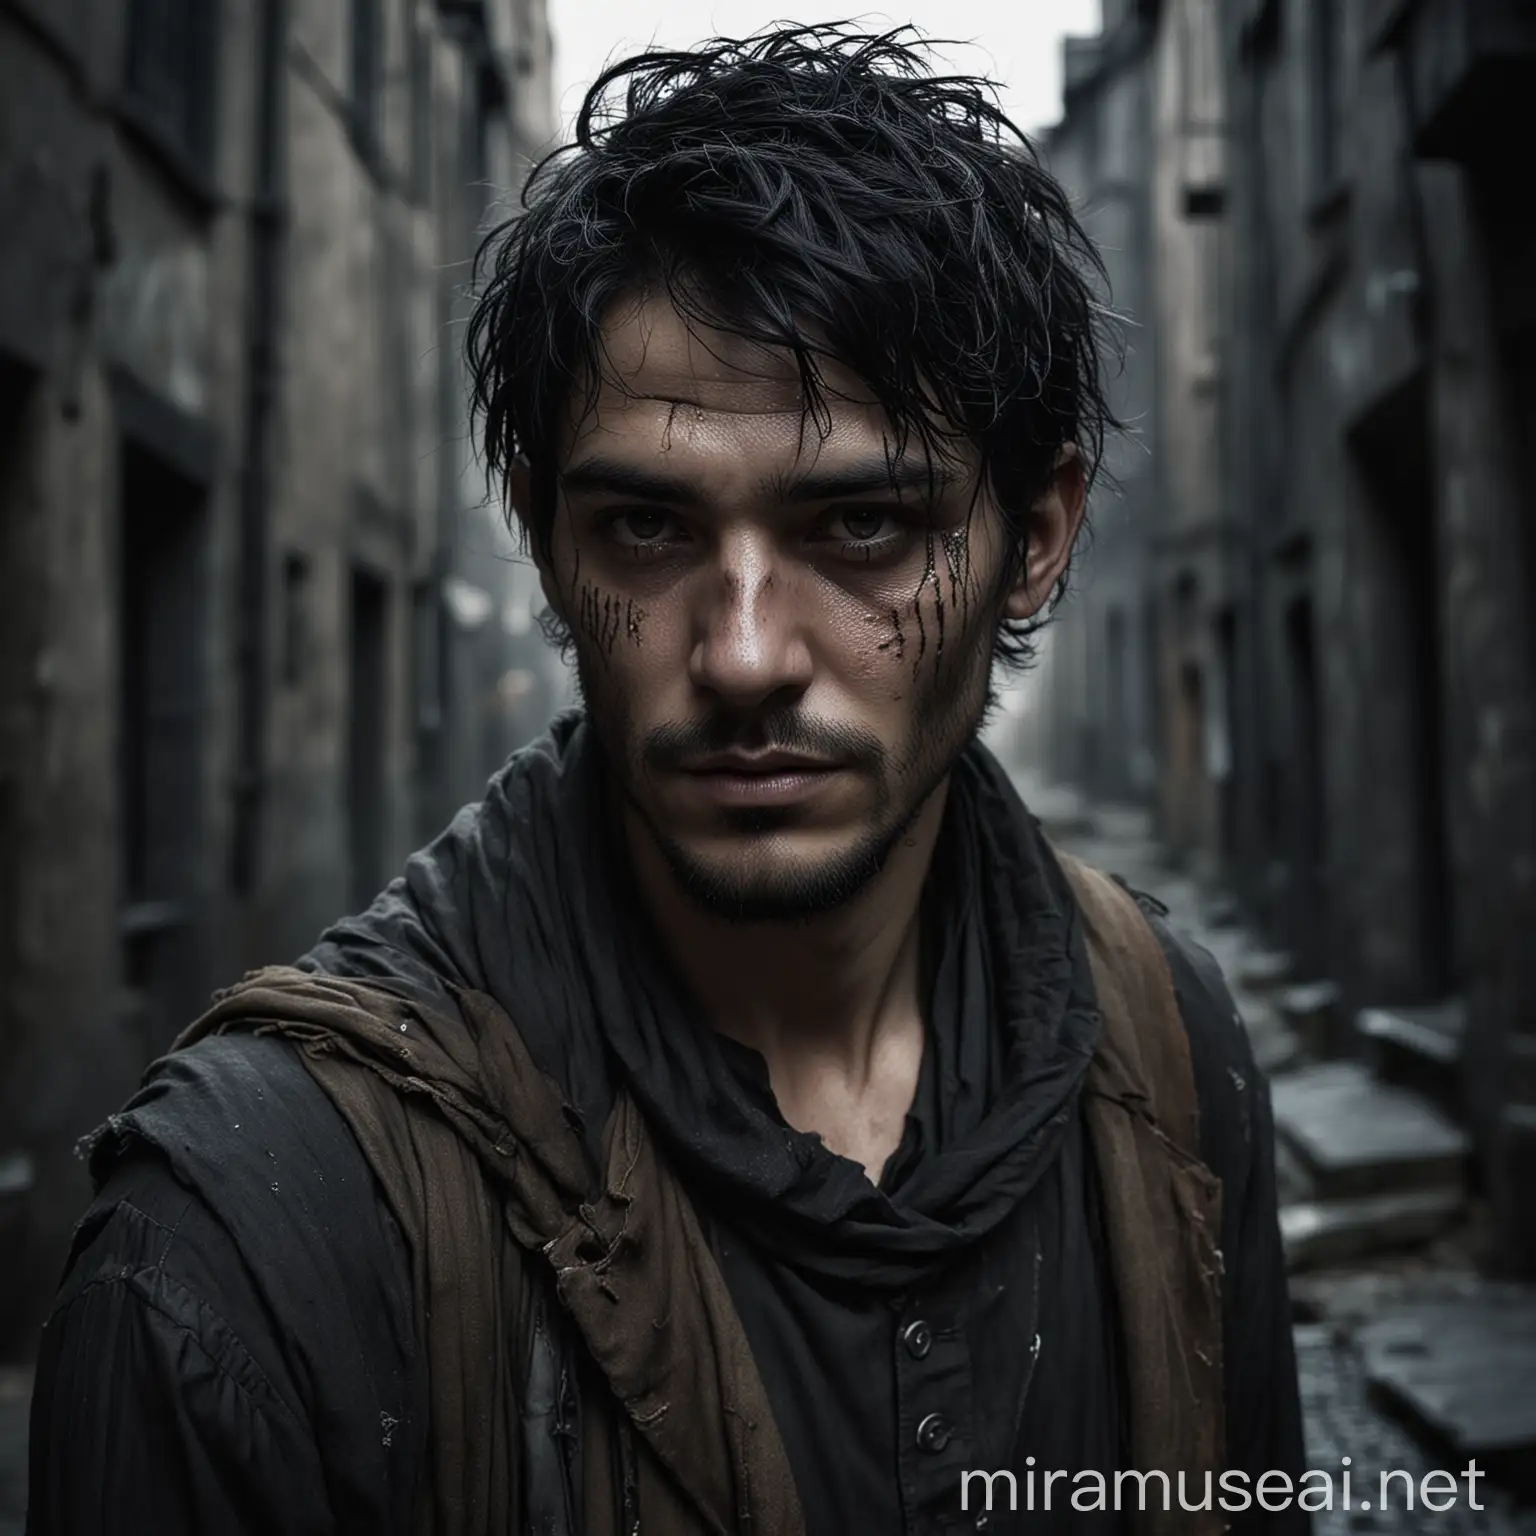 a cinematic realistic photograph of a man dress as a vagabond with black hair and a scar on the cheek, in a dark gothic city